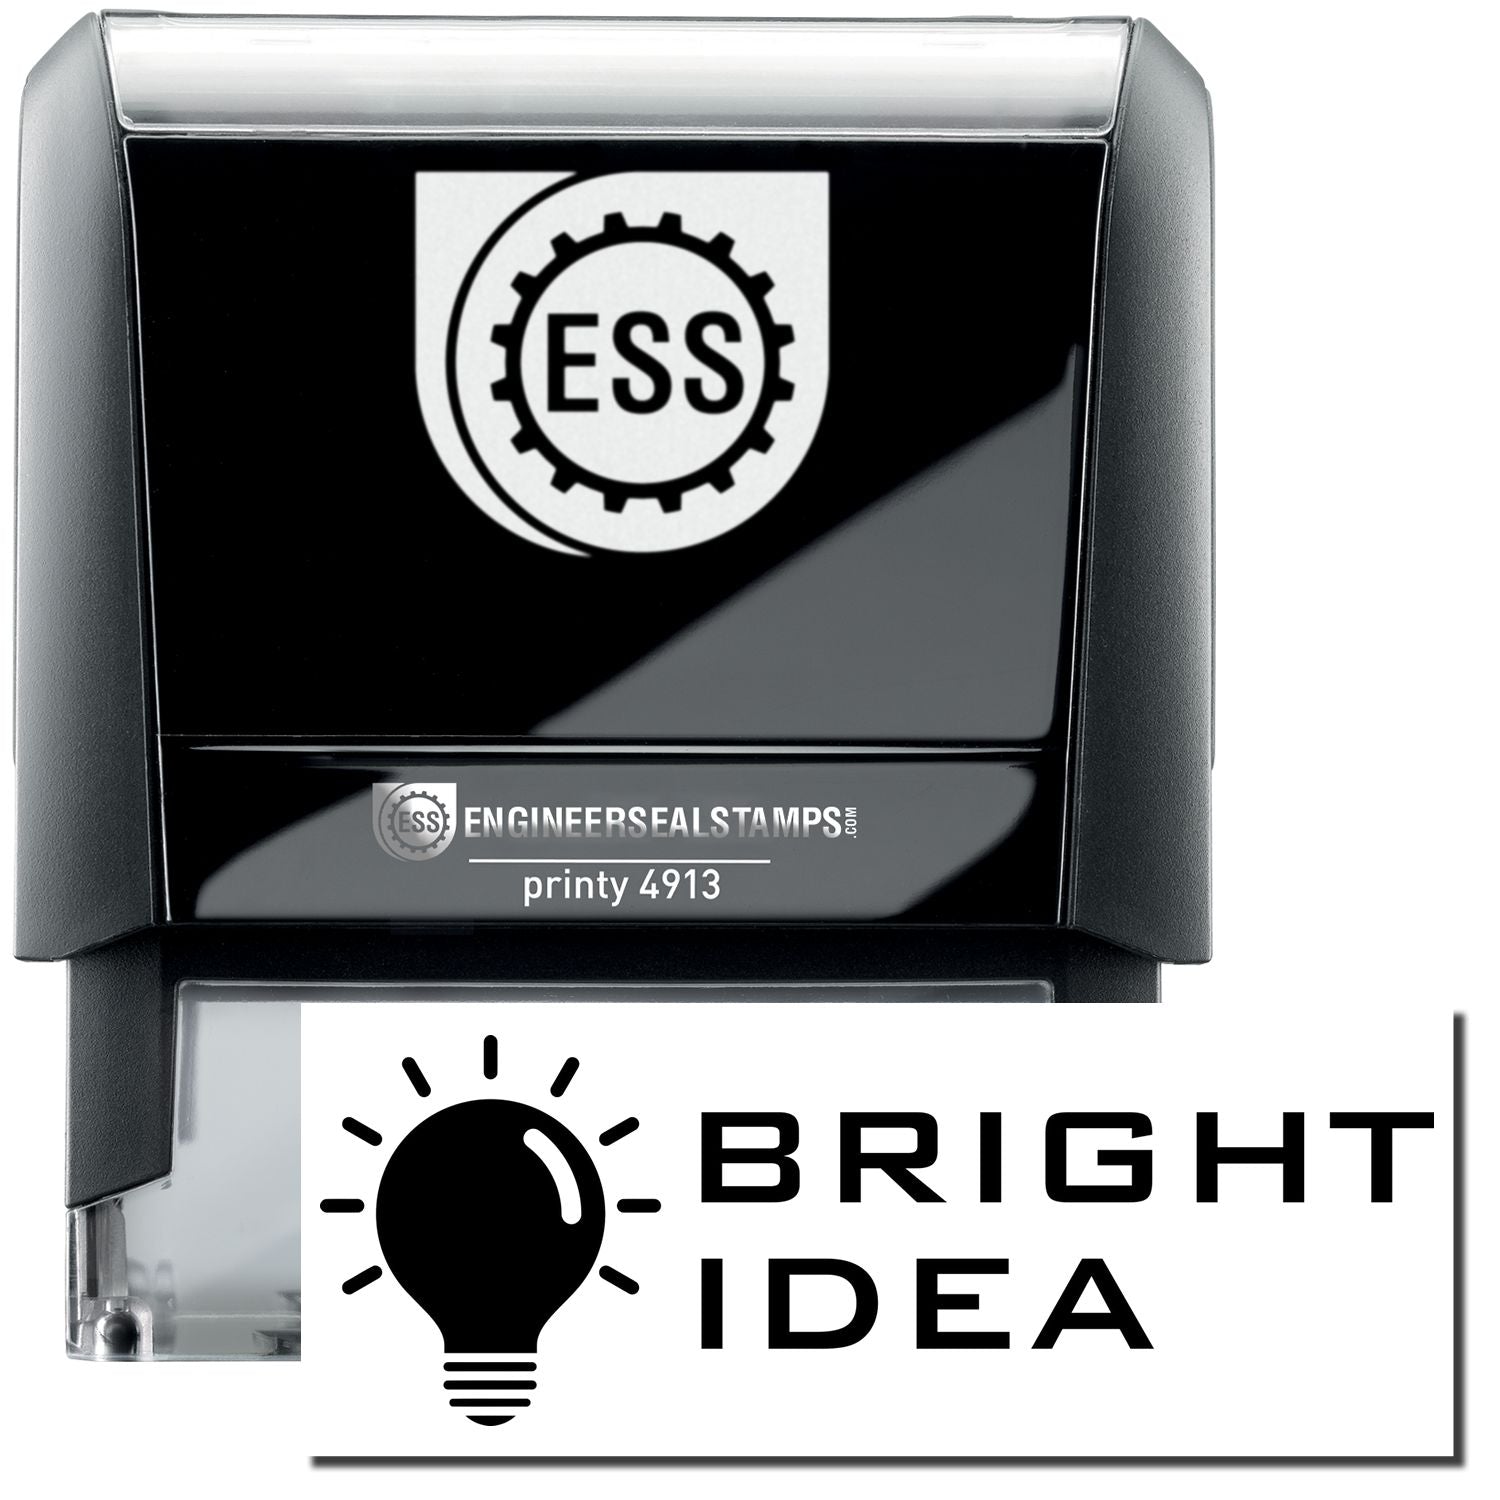 A self-inking stamp with a stamped image showing how the text "BRIGHT IDEA" in a tech-style font with an image of a bright lightbulb on the left side of the text is displayed after stamping.